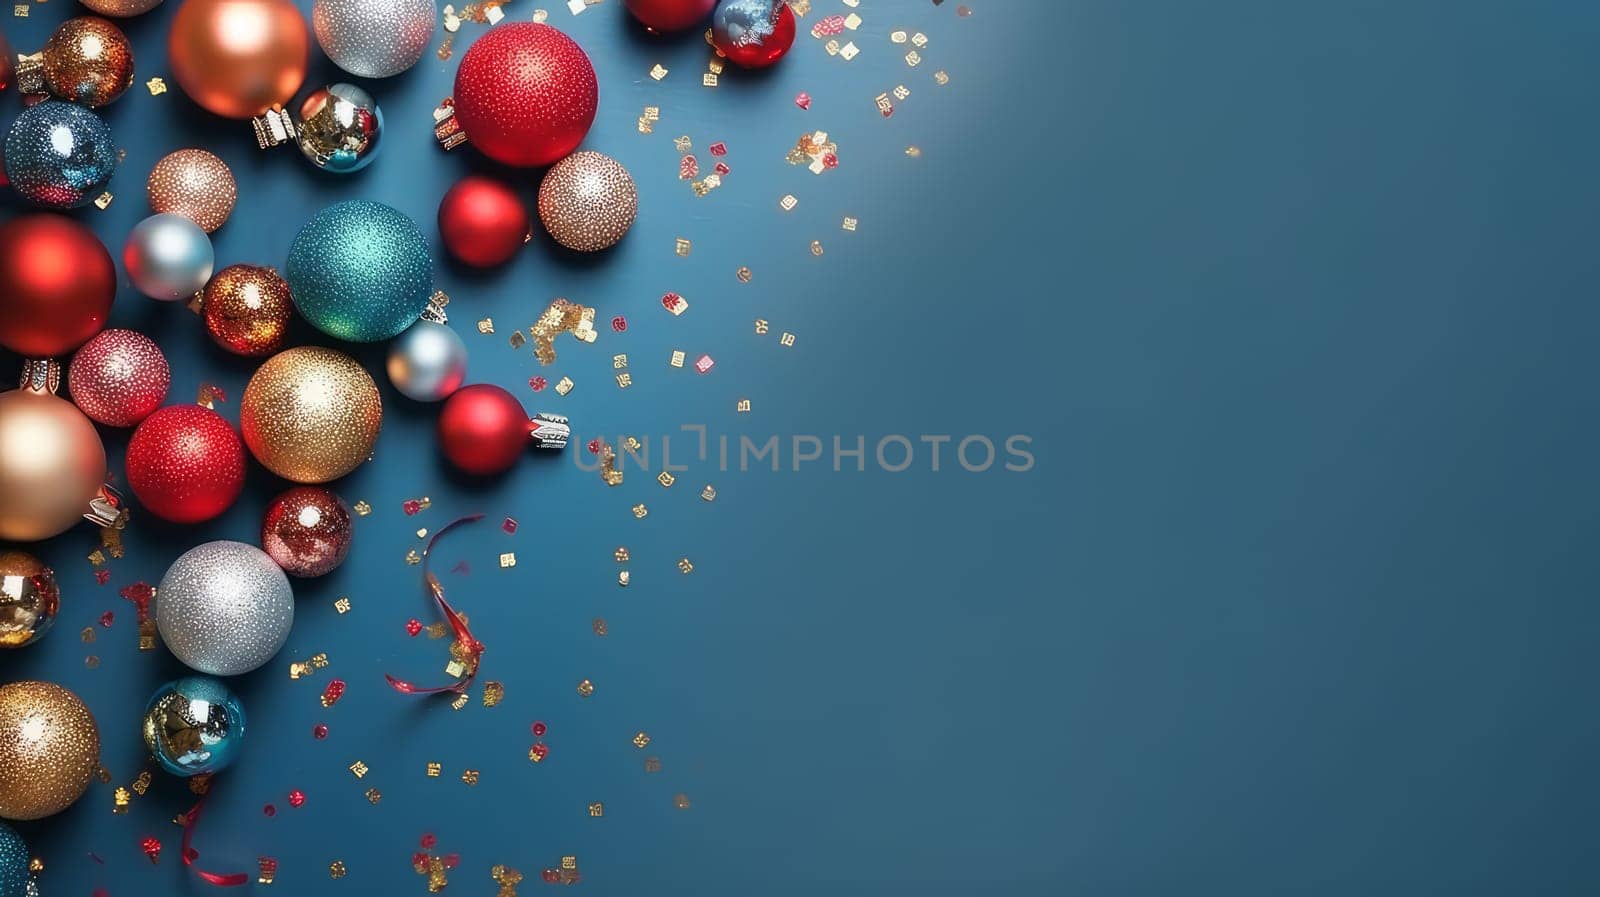 Luxury multi-colored New Year's balls and toys on a blue background on Christmas Eve, copy space. by Alla_Yurtayeva